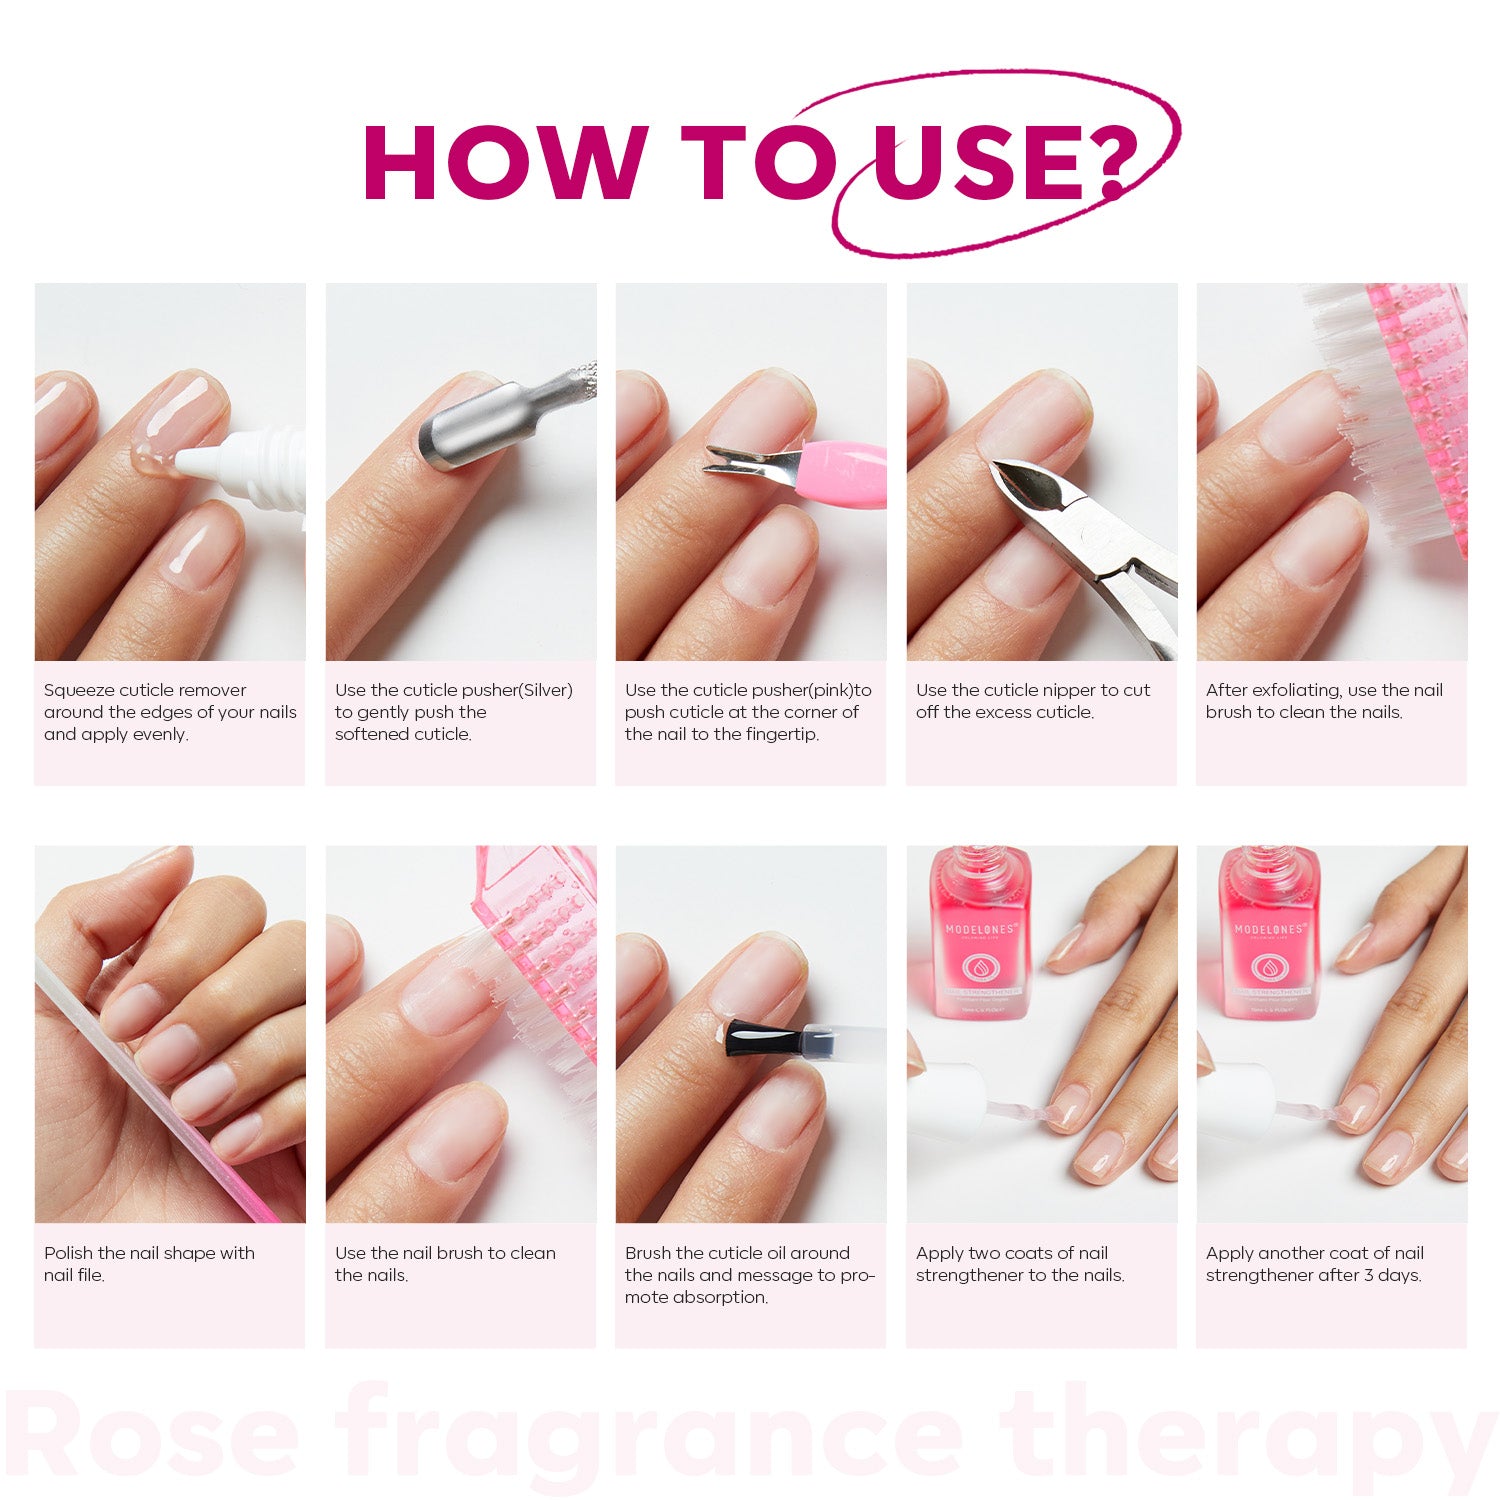 Modelones 8Pcs All-in-one Nail Care Kit【US ONLY】